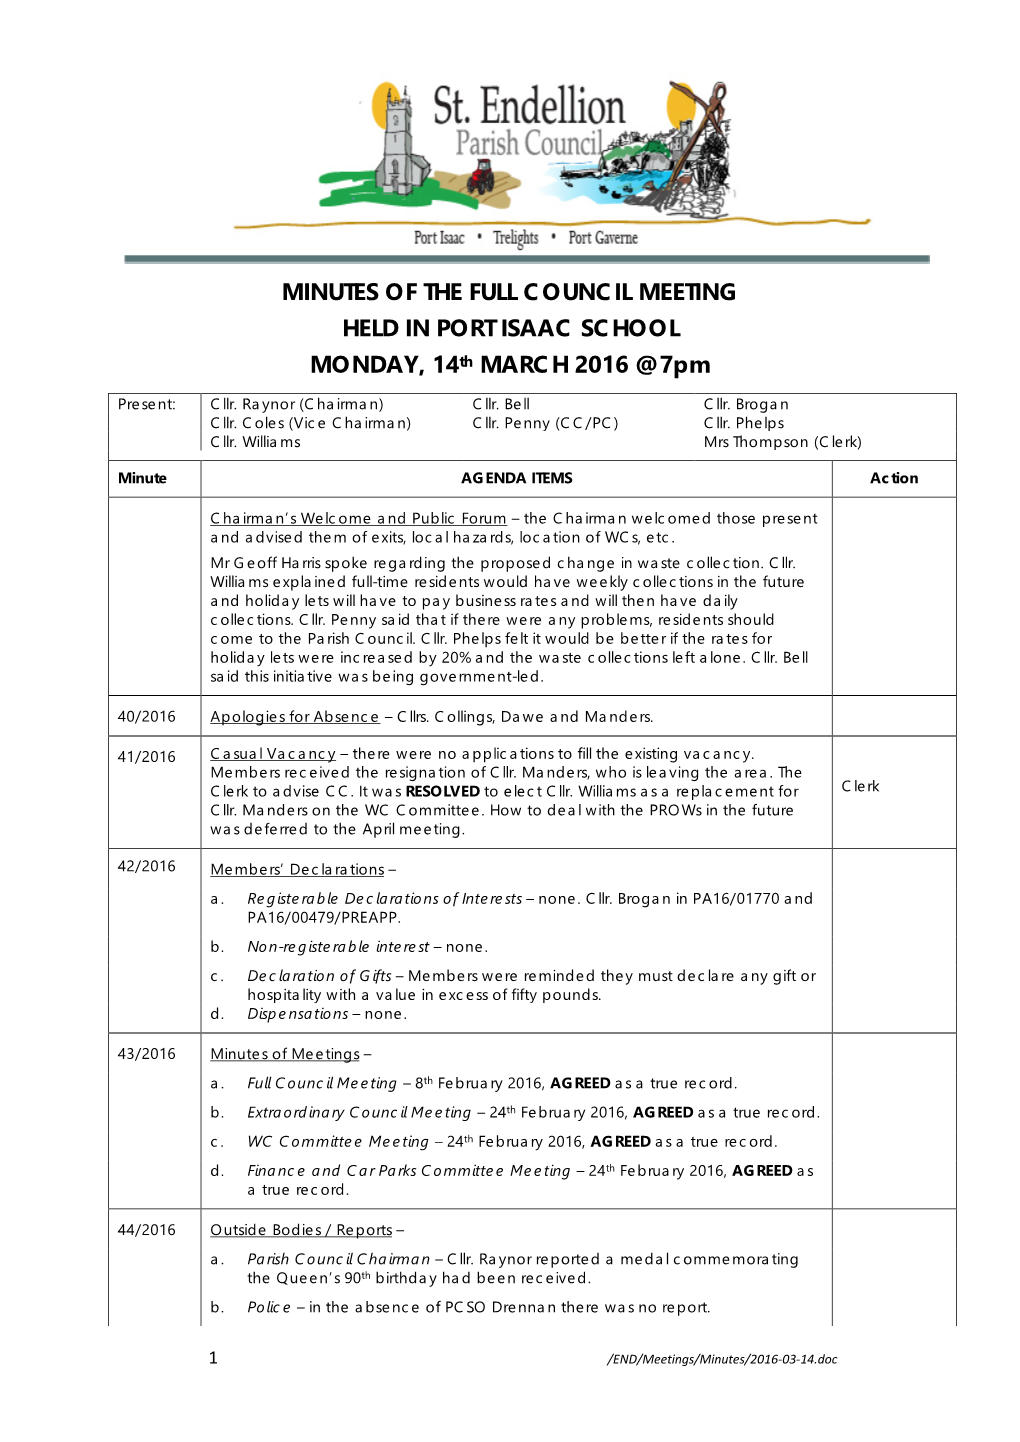 MINUTES of the FULL COUNCIL MEETING HELD in PORT ISAAC SCHOOL MONDAY, 14Th MARCH 2016 @ 7Pm